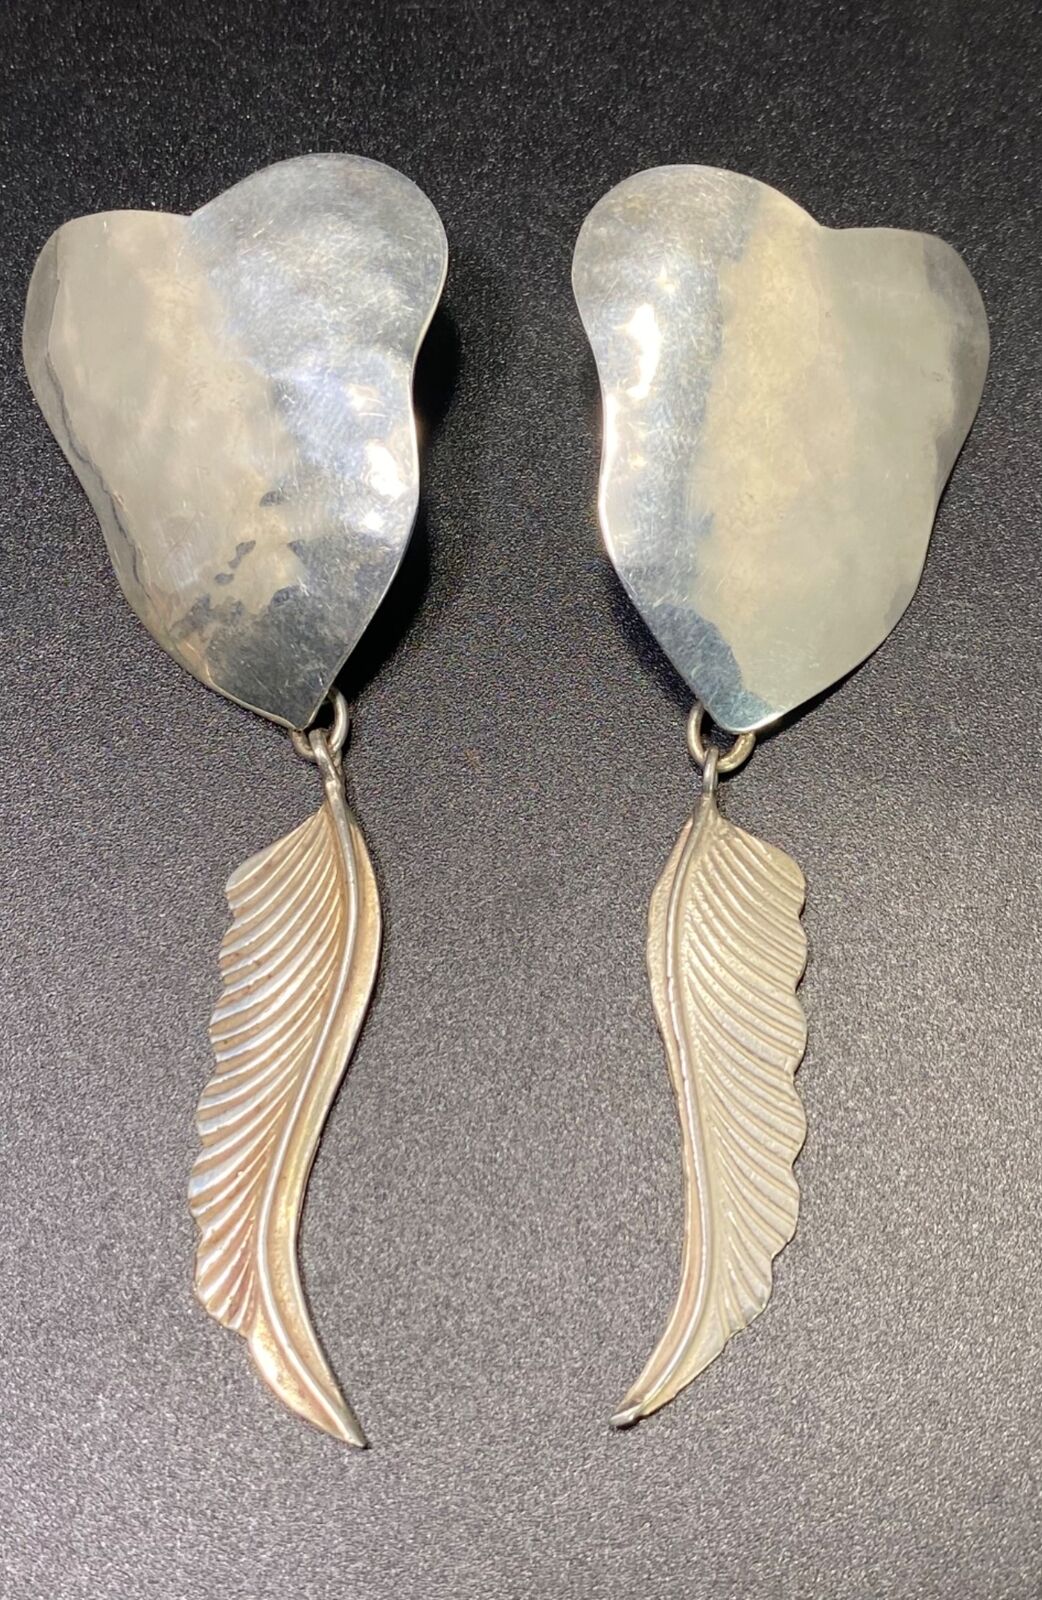 Native American Navajo Earrings 925 Signed Suzi Hammered Articulated Feathers